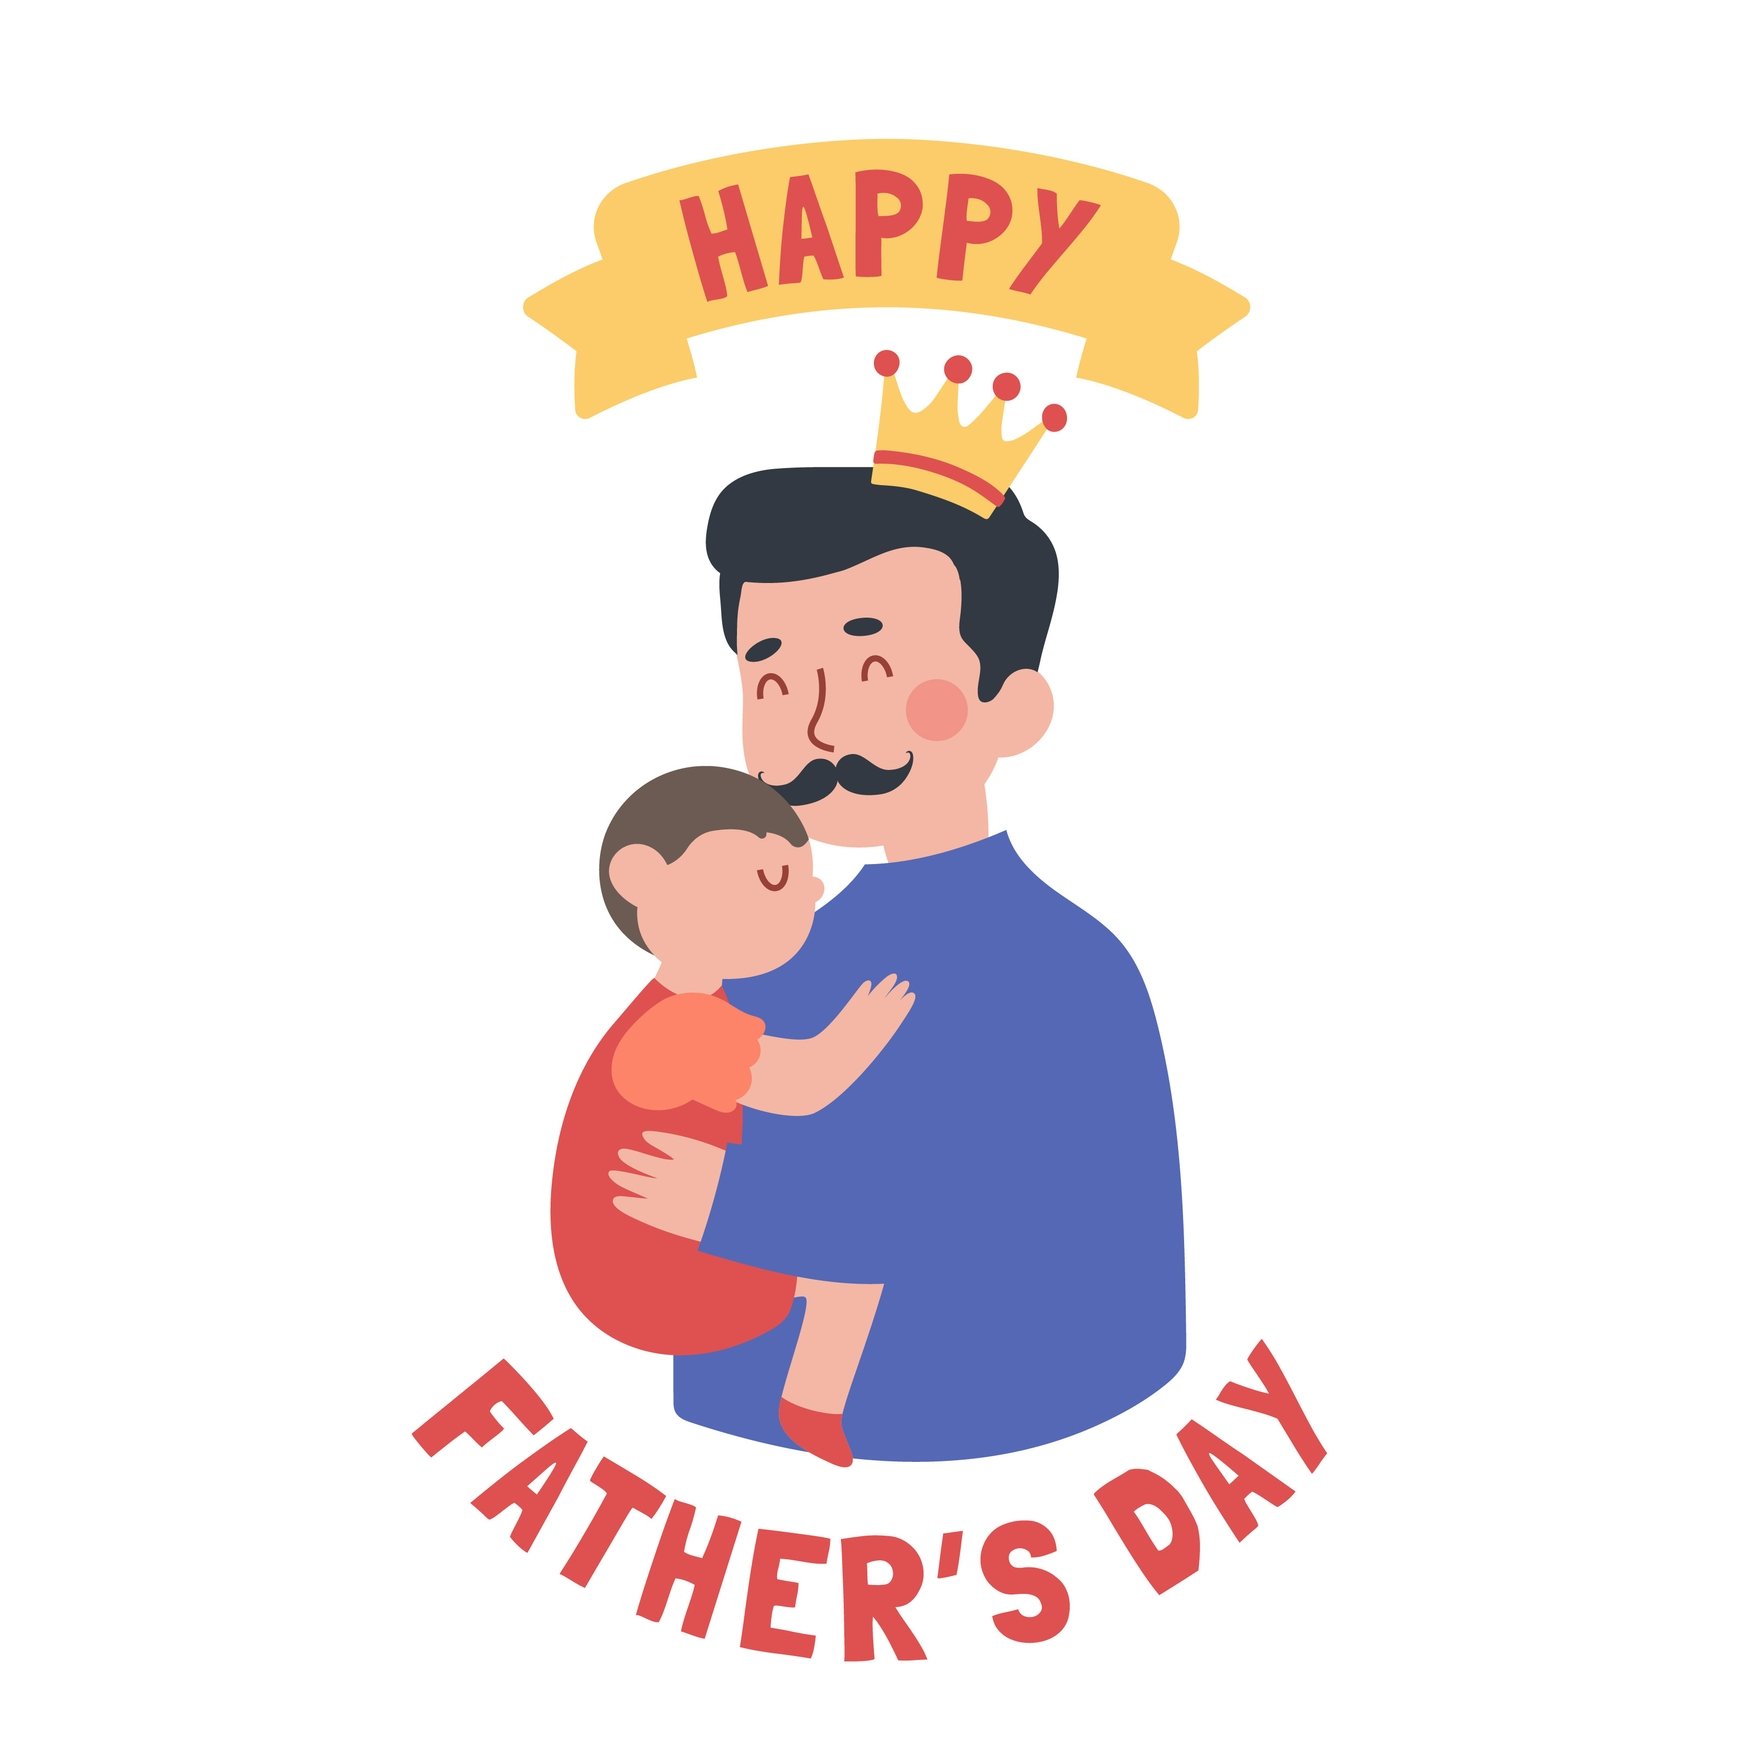 Free Happy Father's Day Gif - Download in Illustrator, EPS, SVG, JPG, GIF,  PNG, After Effects